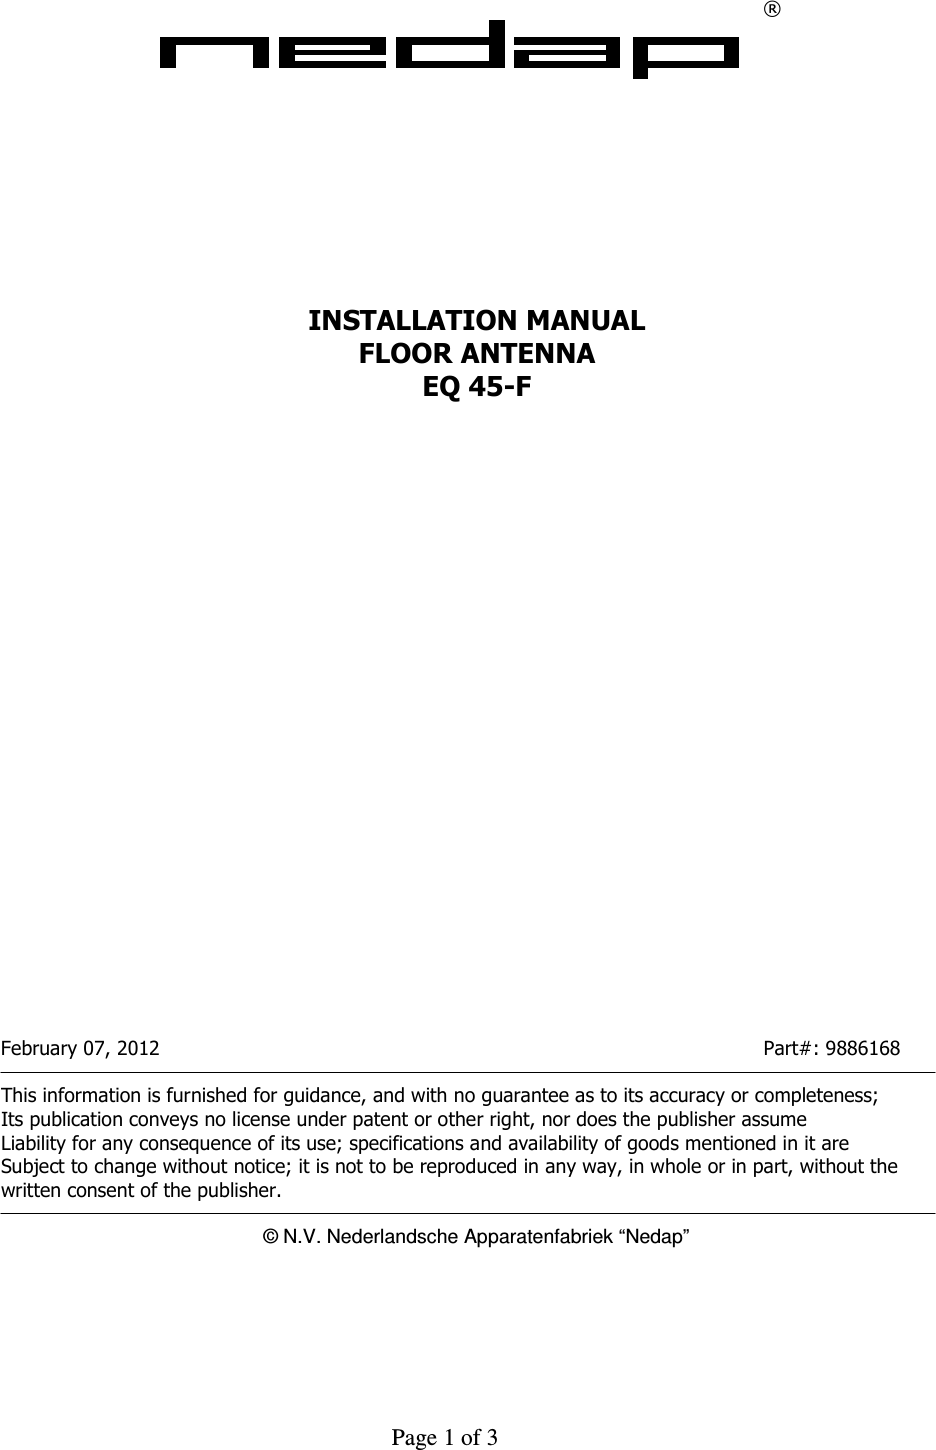     Page 1 of 3    ®             INSTALLATION MANUAL FLOOR ANTENNA EQ 45-F                           February 07, 2012                  Part#: 9886168  This information is furnished for guidance, and with no guarantee as to its accuracy or completeness; Its publication conveys no license under patent or other right, nor does the publisher assume Liability for any consequence of its use; specifications and availability of goods mentioned in it are Subject to change without notice; it is not to be reproduced in any way, in whole or in part, without the written consent of the publisher.  © N.V. Nederlandsche Apparatenfabriek “Nedap”